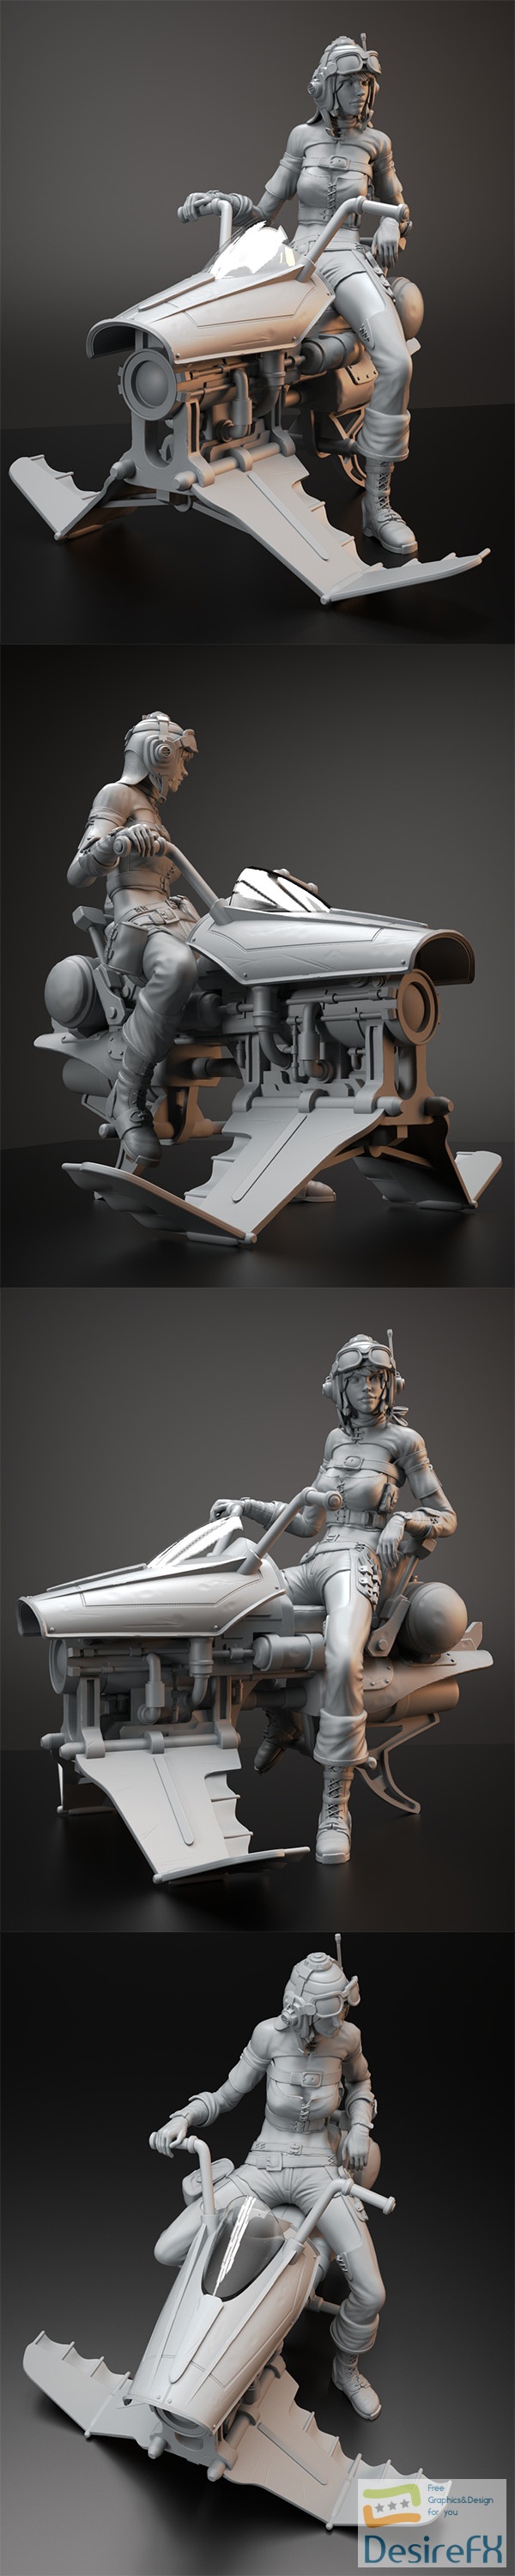 Lybbia the engineer - 3D Print